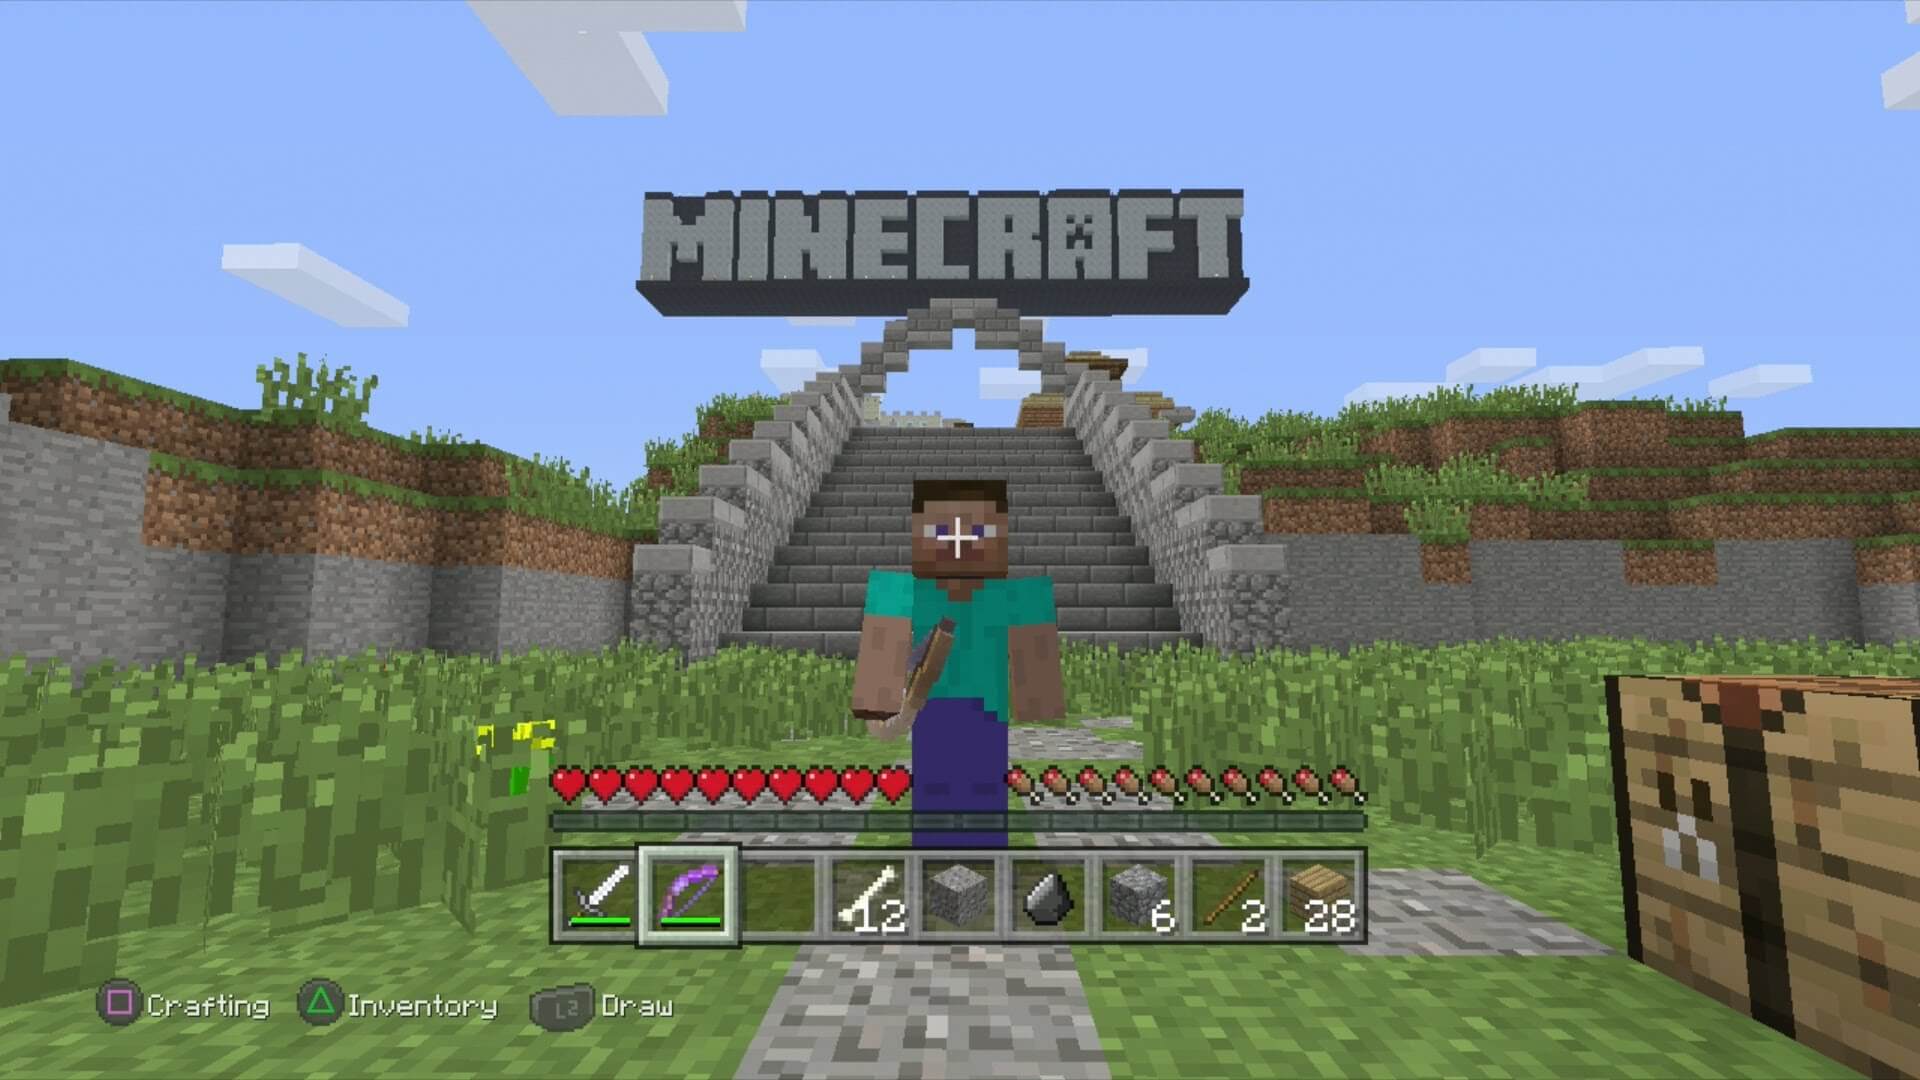 can you play minecraft ps3 on ps4